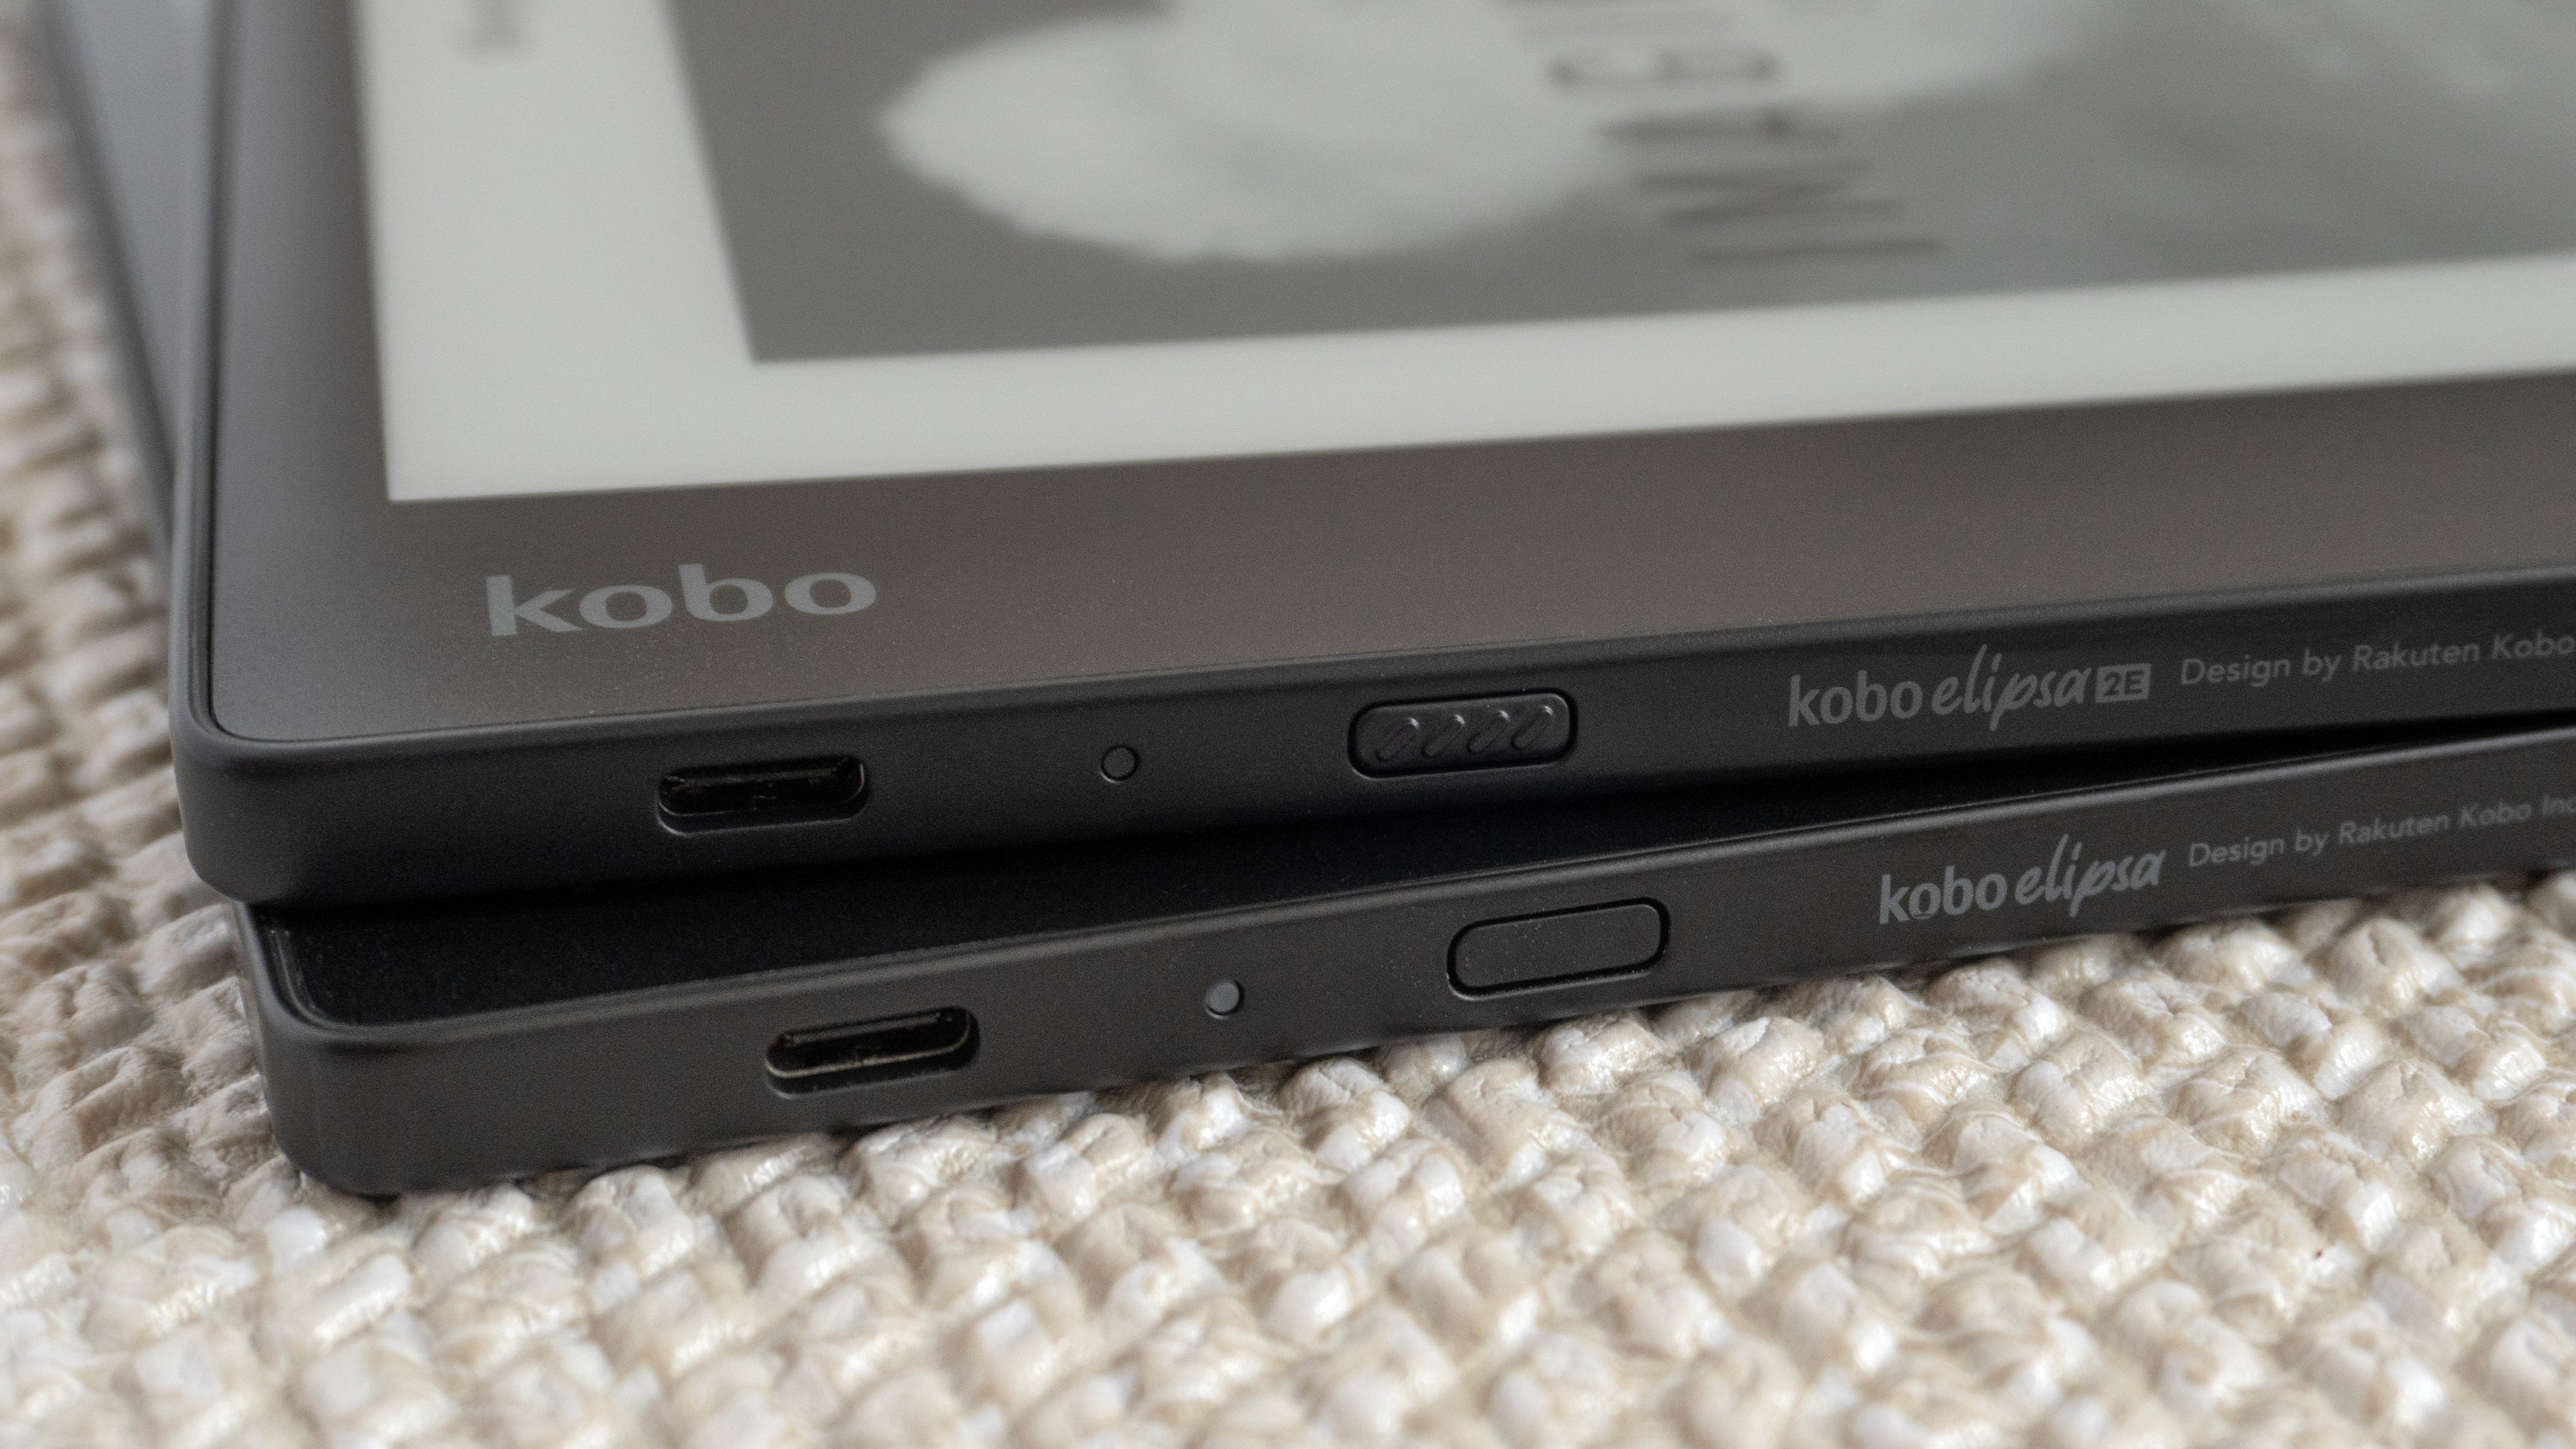 The Kobo Elipsa 2E's power/sleep/wake button (top) has been upgraded with some welcome bumps making it easy to find by sliding your finger along the edge of the e-note. (Photo: Andrew Liszewski | Gizmodo)